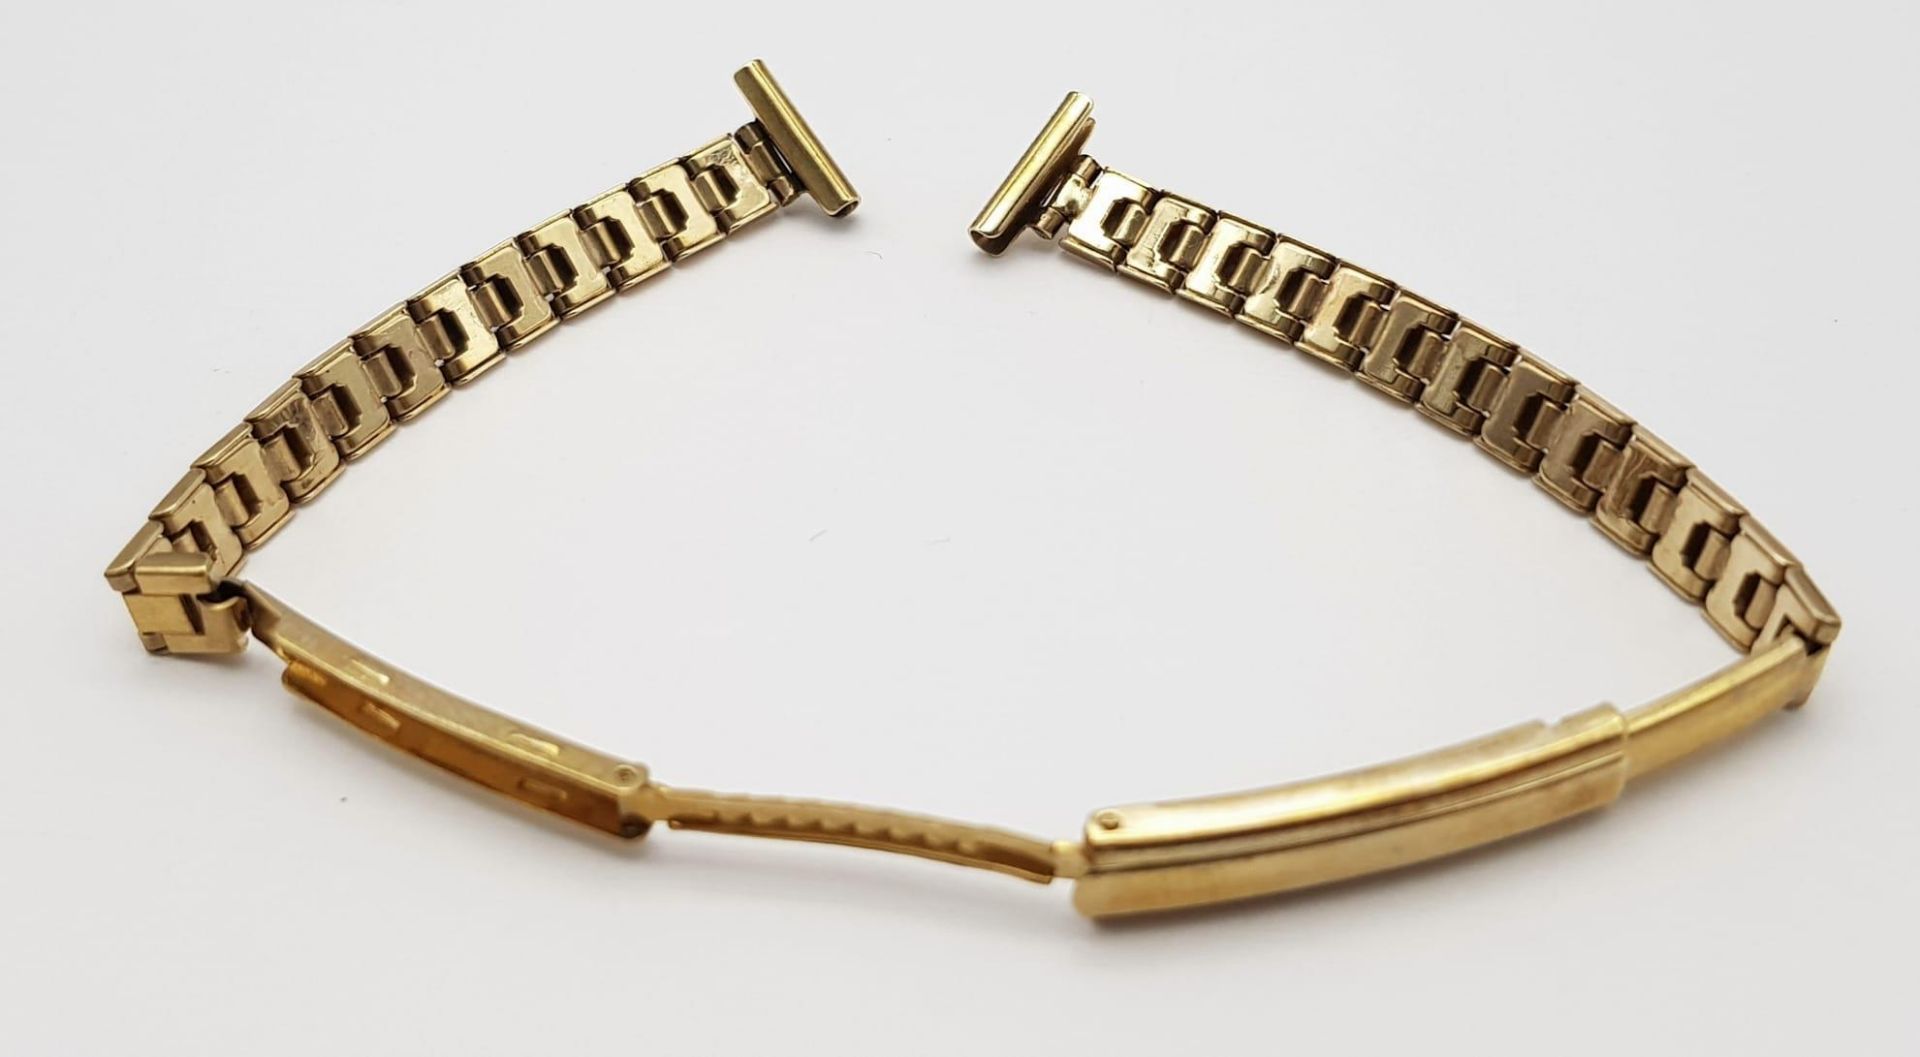 A BRAND NEW LADIES 9K GOLD WATCH STRAP WITH REMOVABLE LINKS FOR SIZE ADJUSTMENT . 9gms - Image 2 of 6